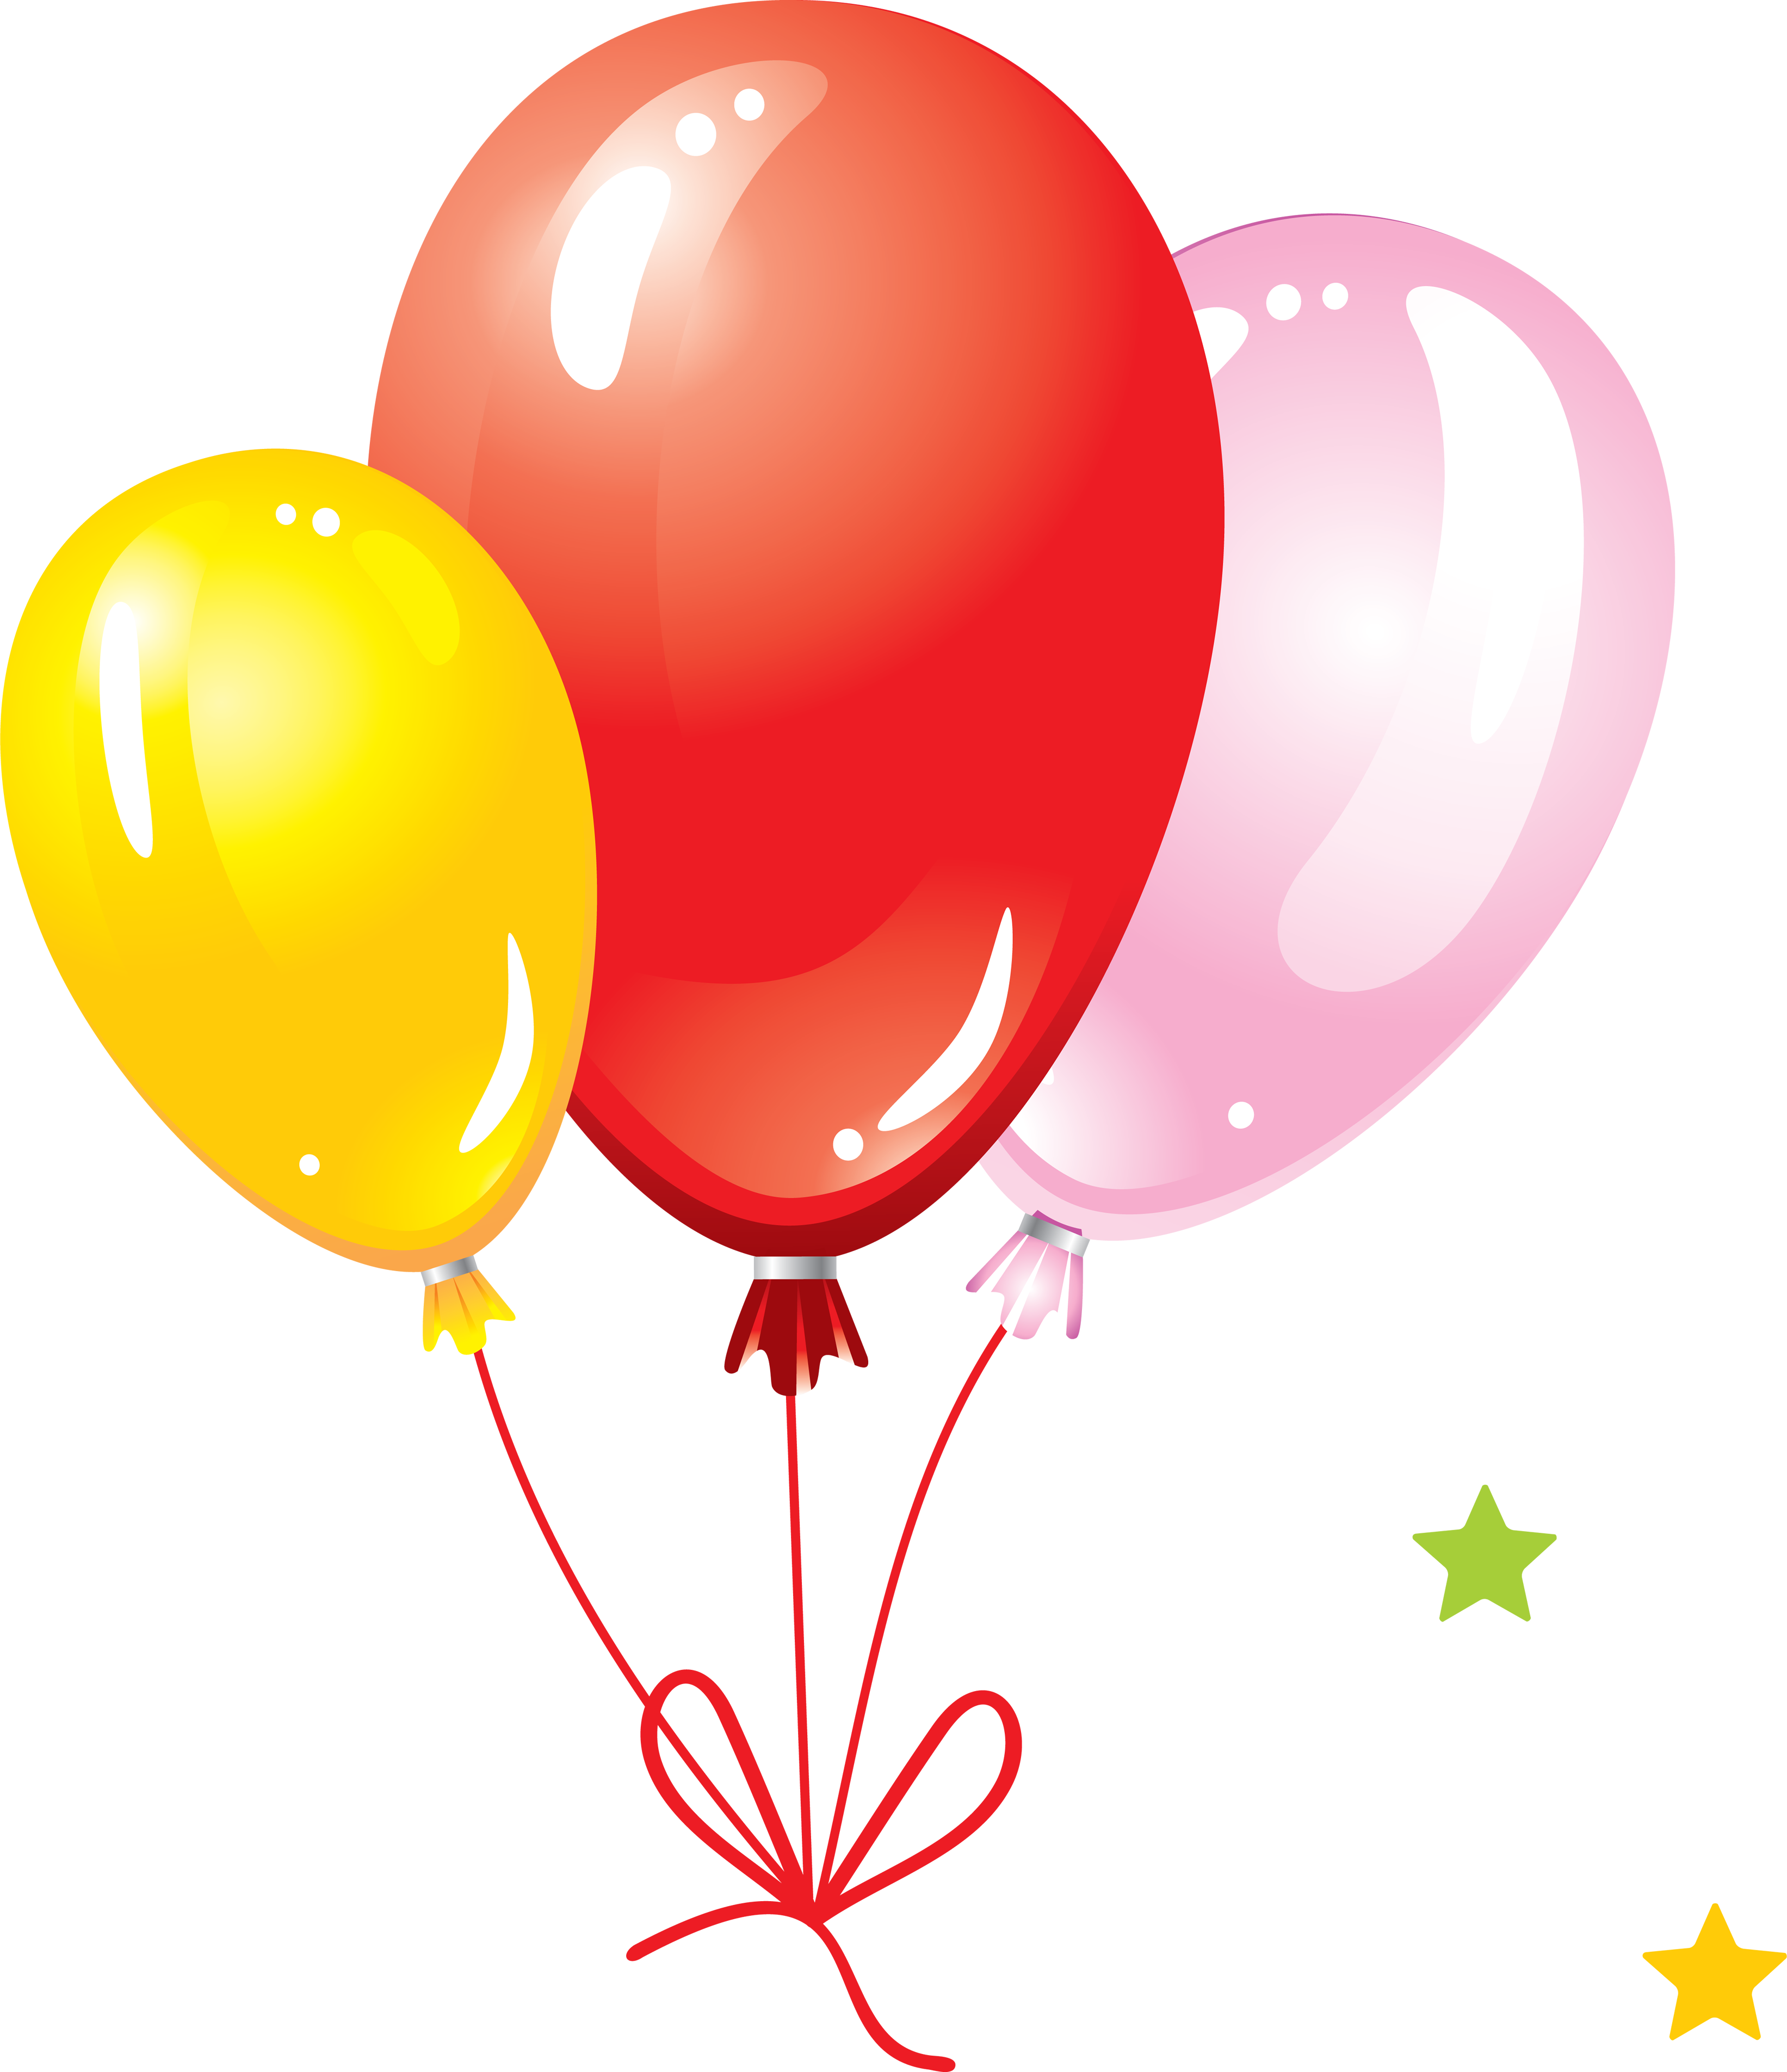 Download Png Image Balloon Free Balloons clipart free image